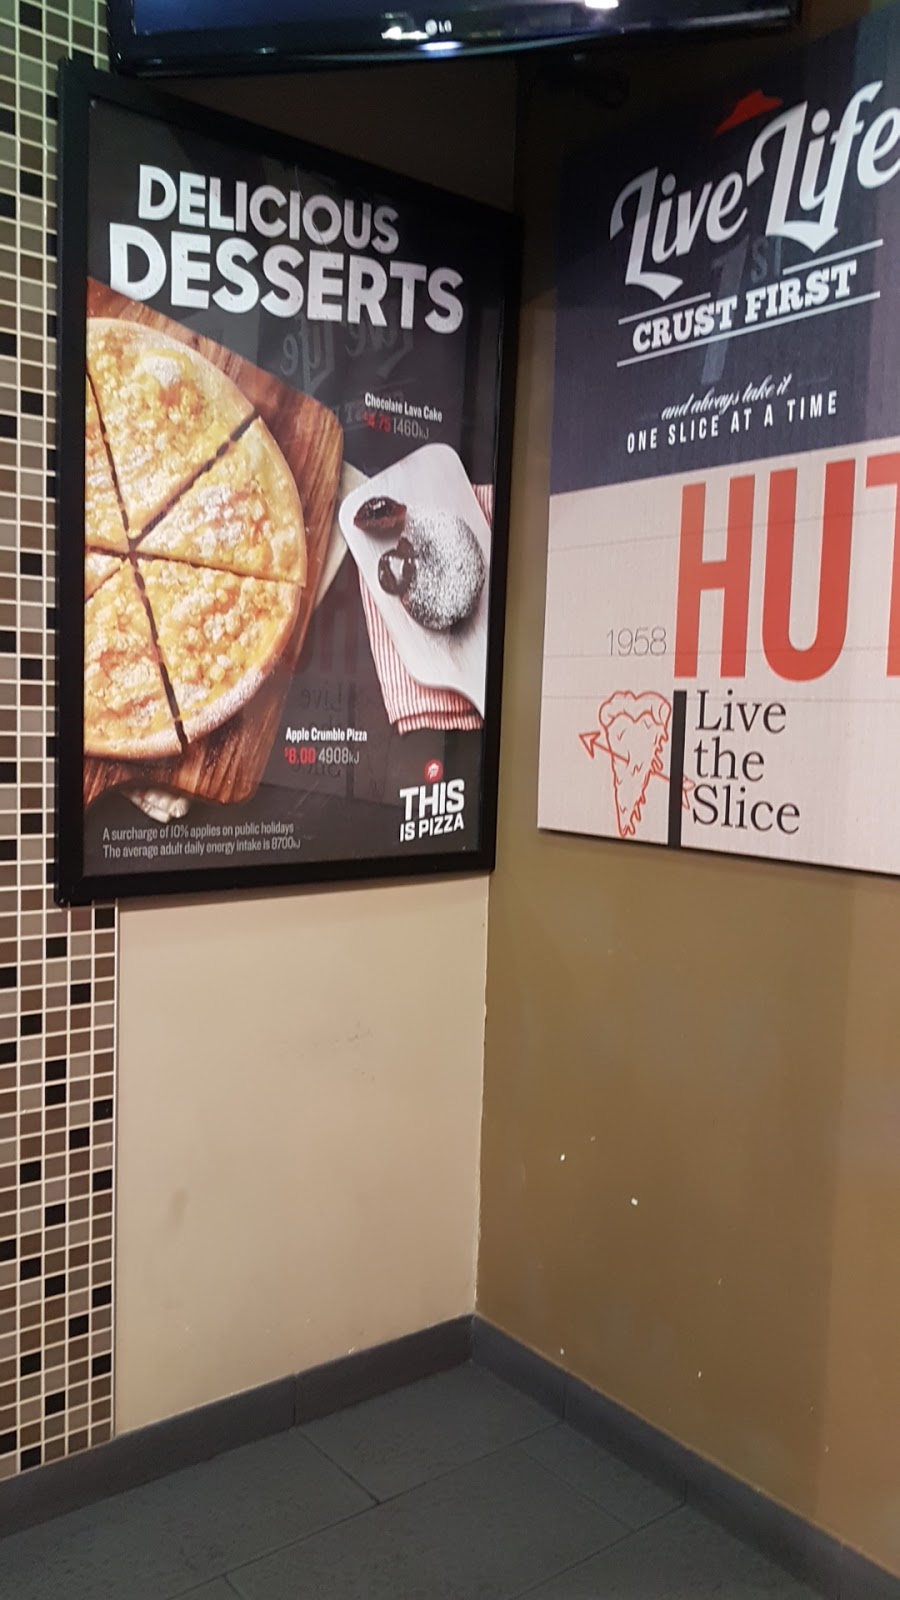 Pizza Hut Shellharbour | meal delivery | 15 College Ave, Shellharbour City Centre NSW 2529, Australia | 131166 OR +61 131166